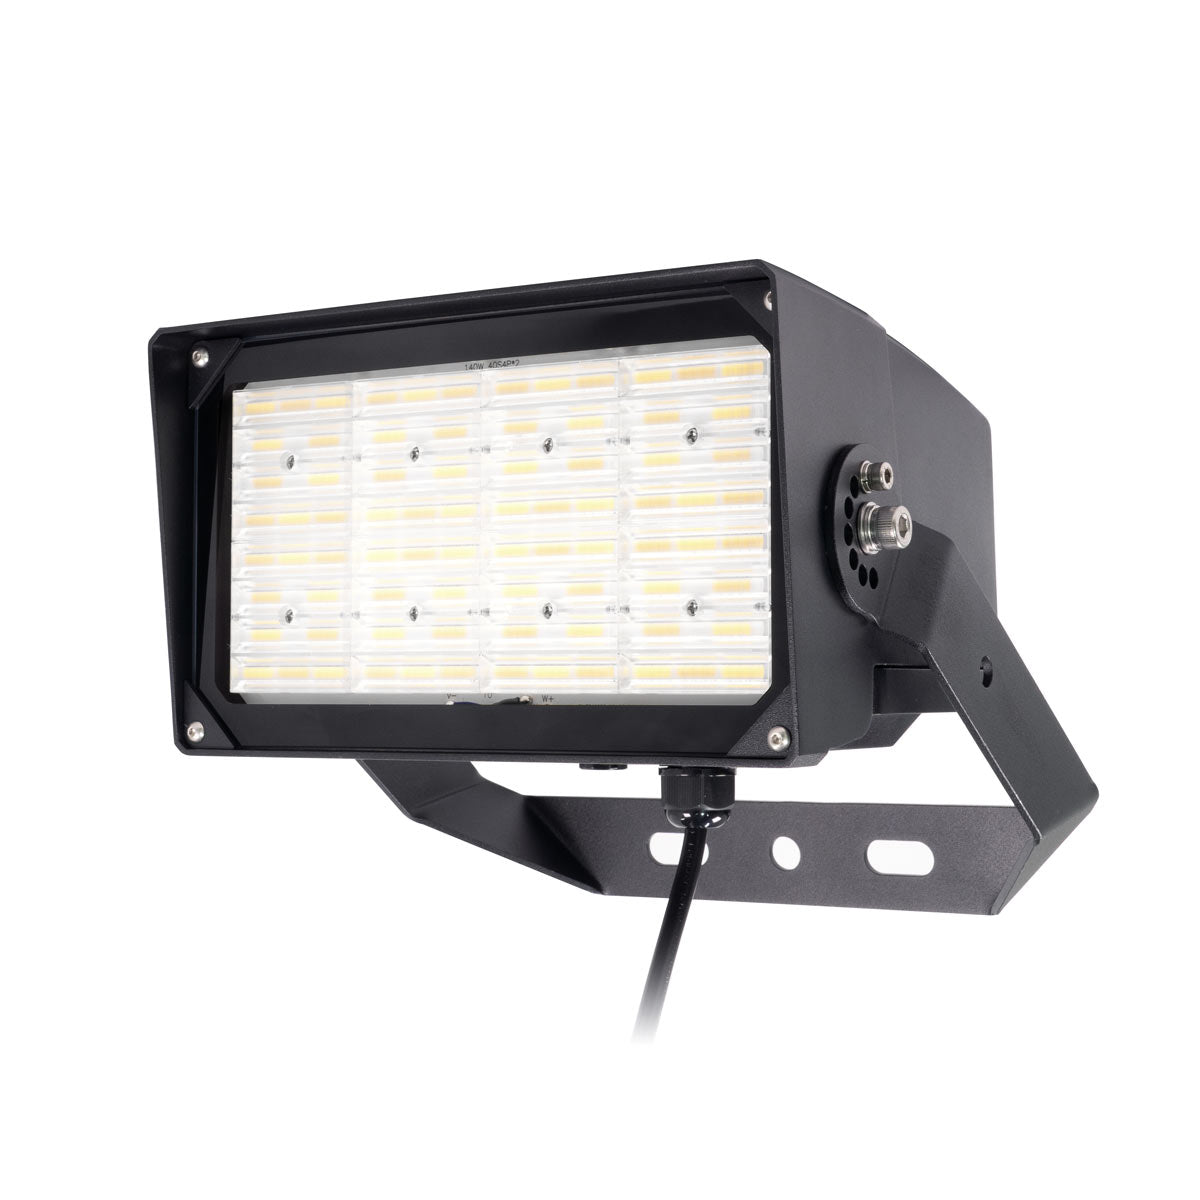 Selectable LUX LED Flood Light - 45W to 150W